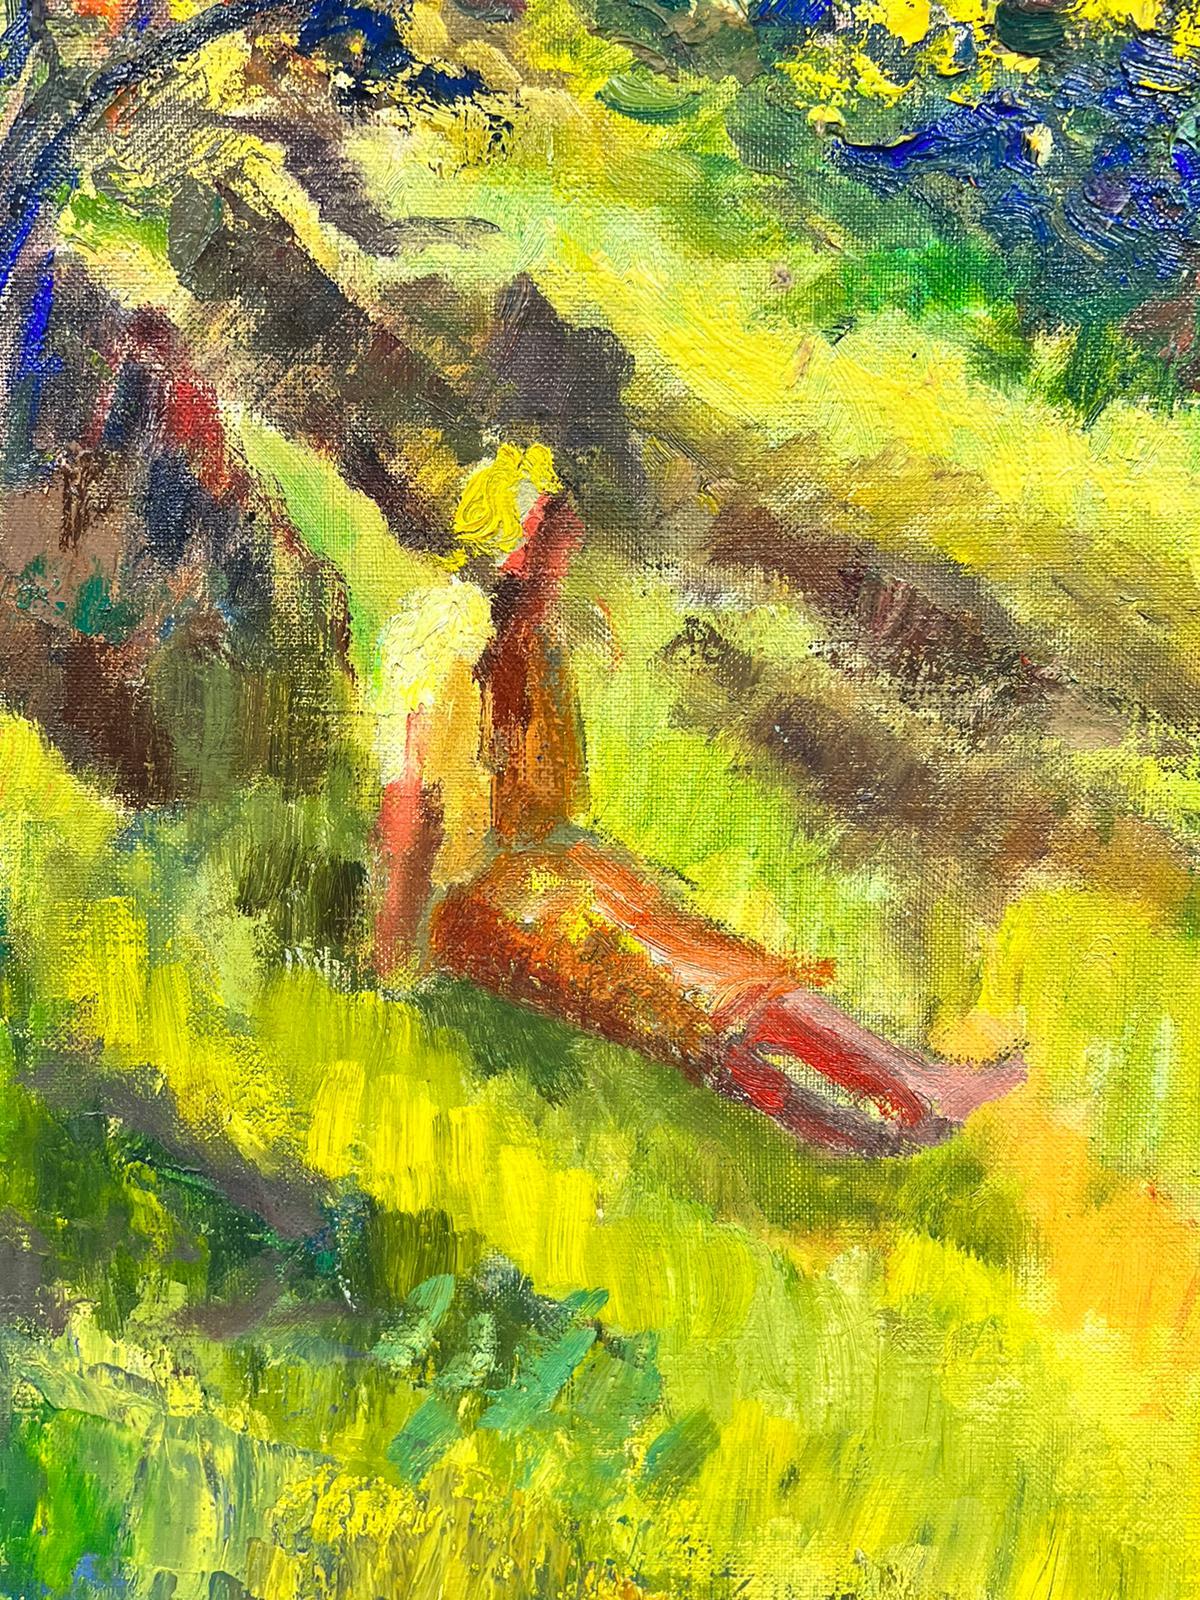 20th Century French Post Impressionist Oil Lady in Sunlit Green Meadow Landscape - Post-Impressionist Painting by Josine Vignon